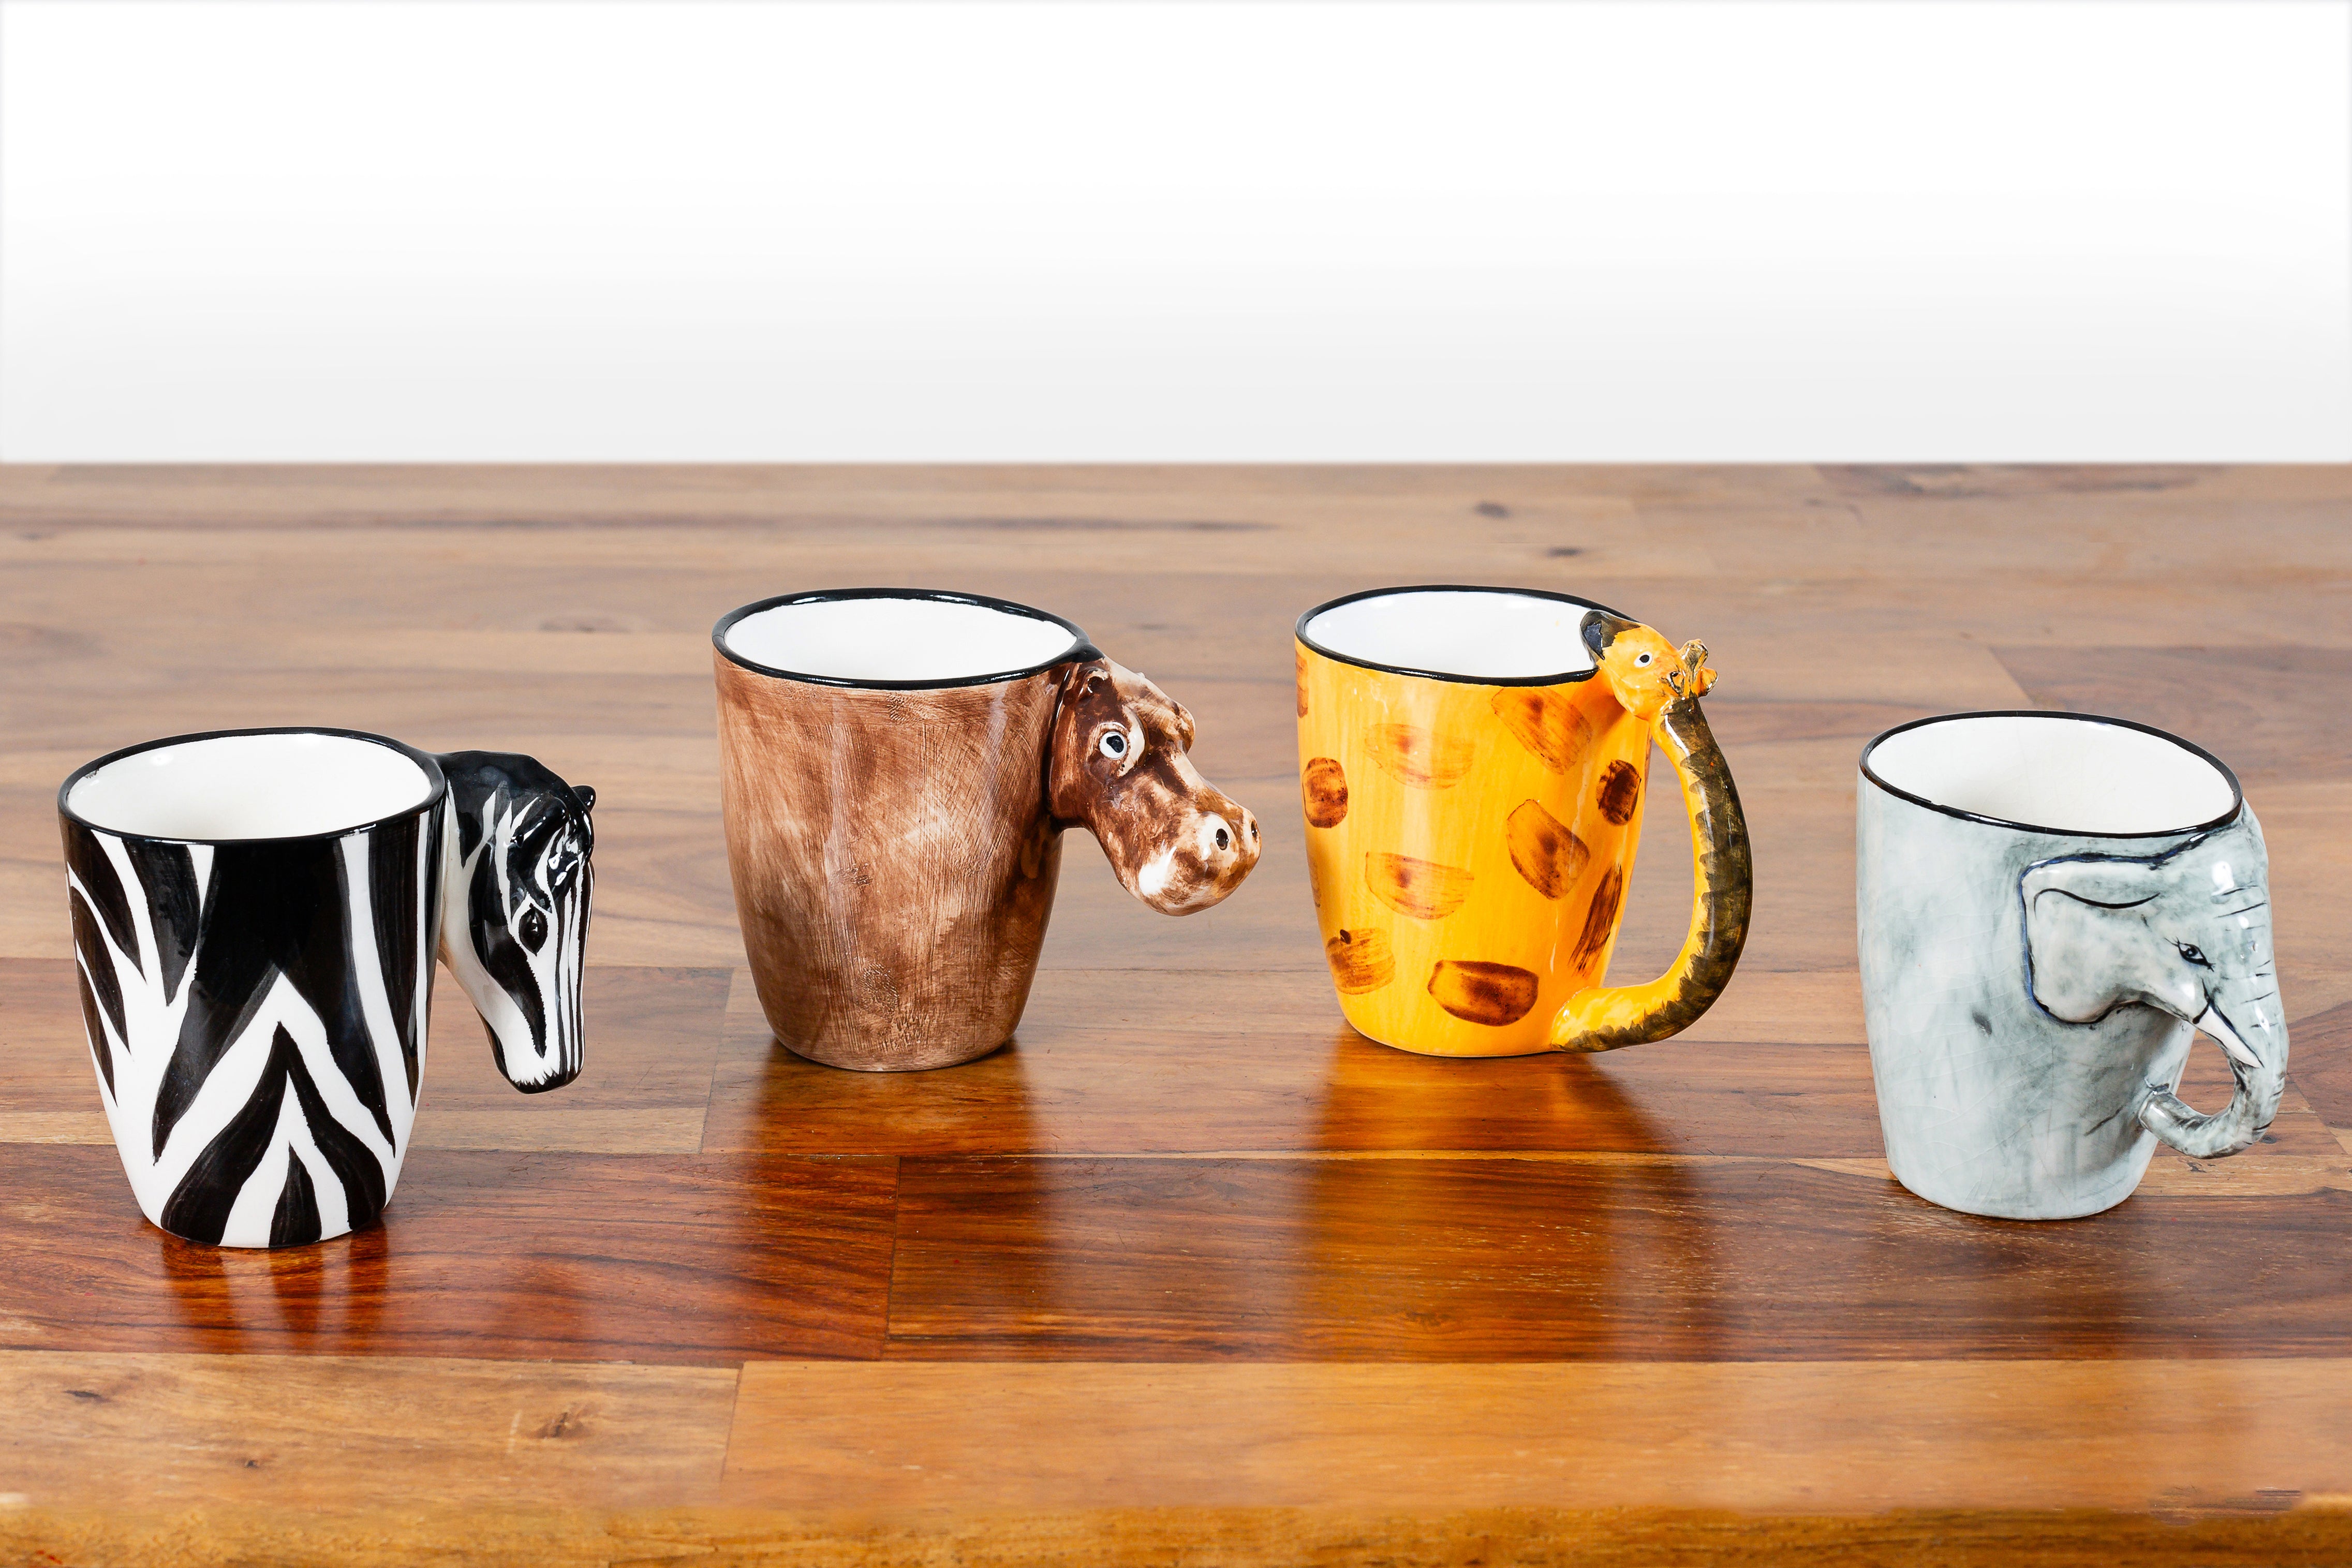 Collect all 4 of these animal mugs, from left, zebra, hippo, giraffe, and elephant!